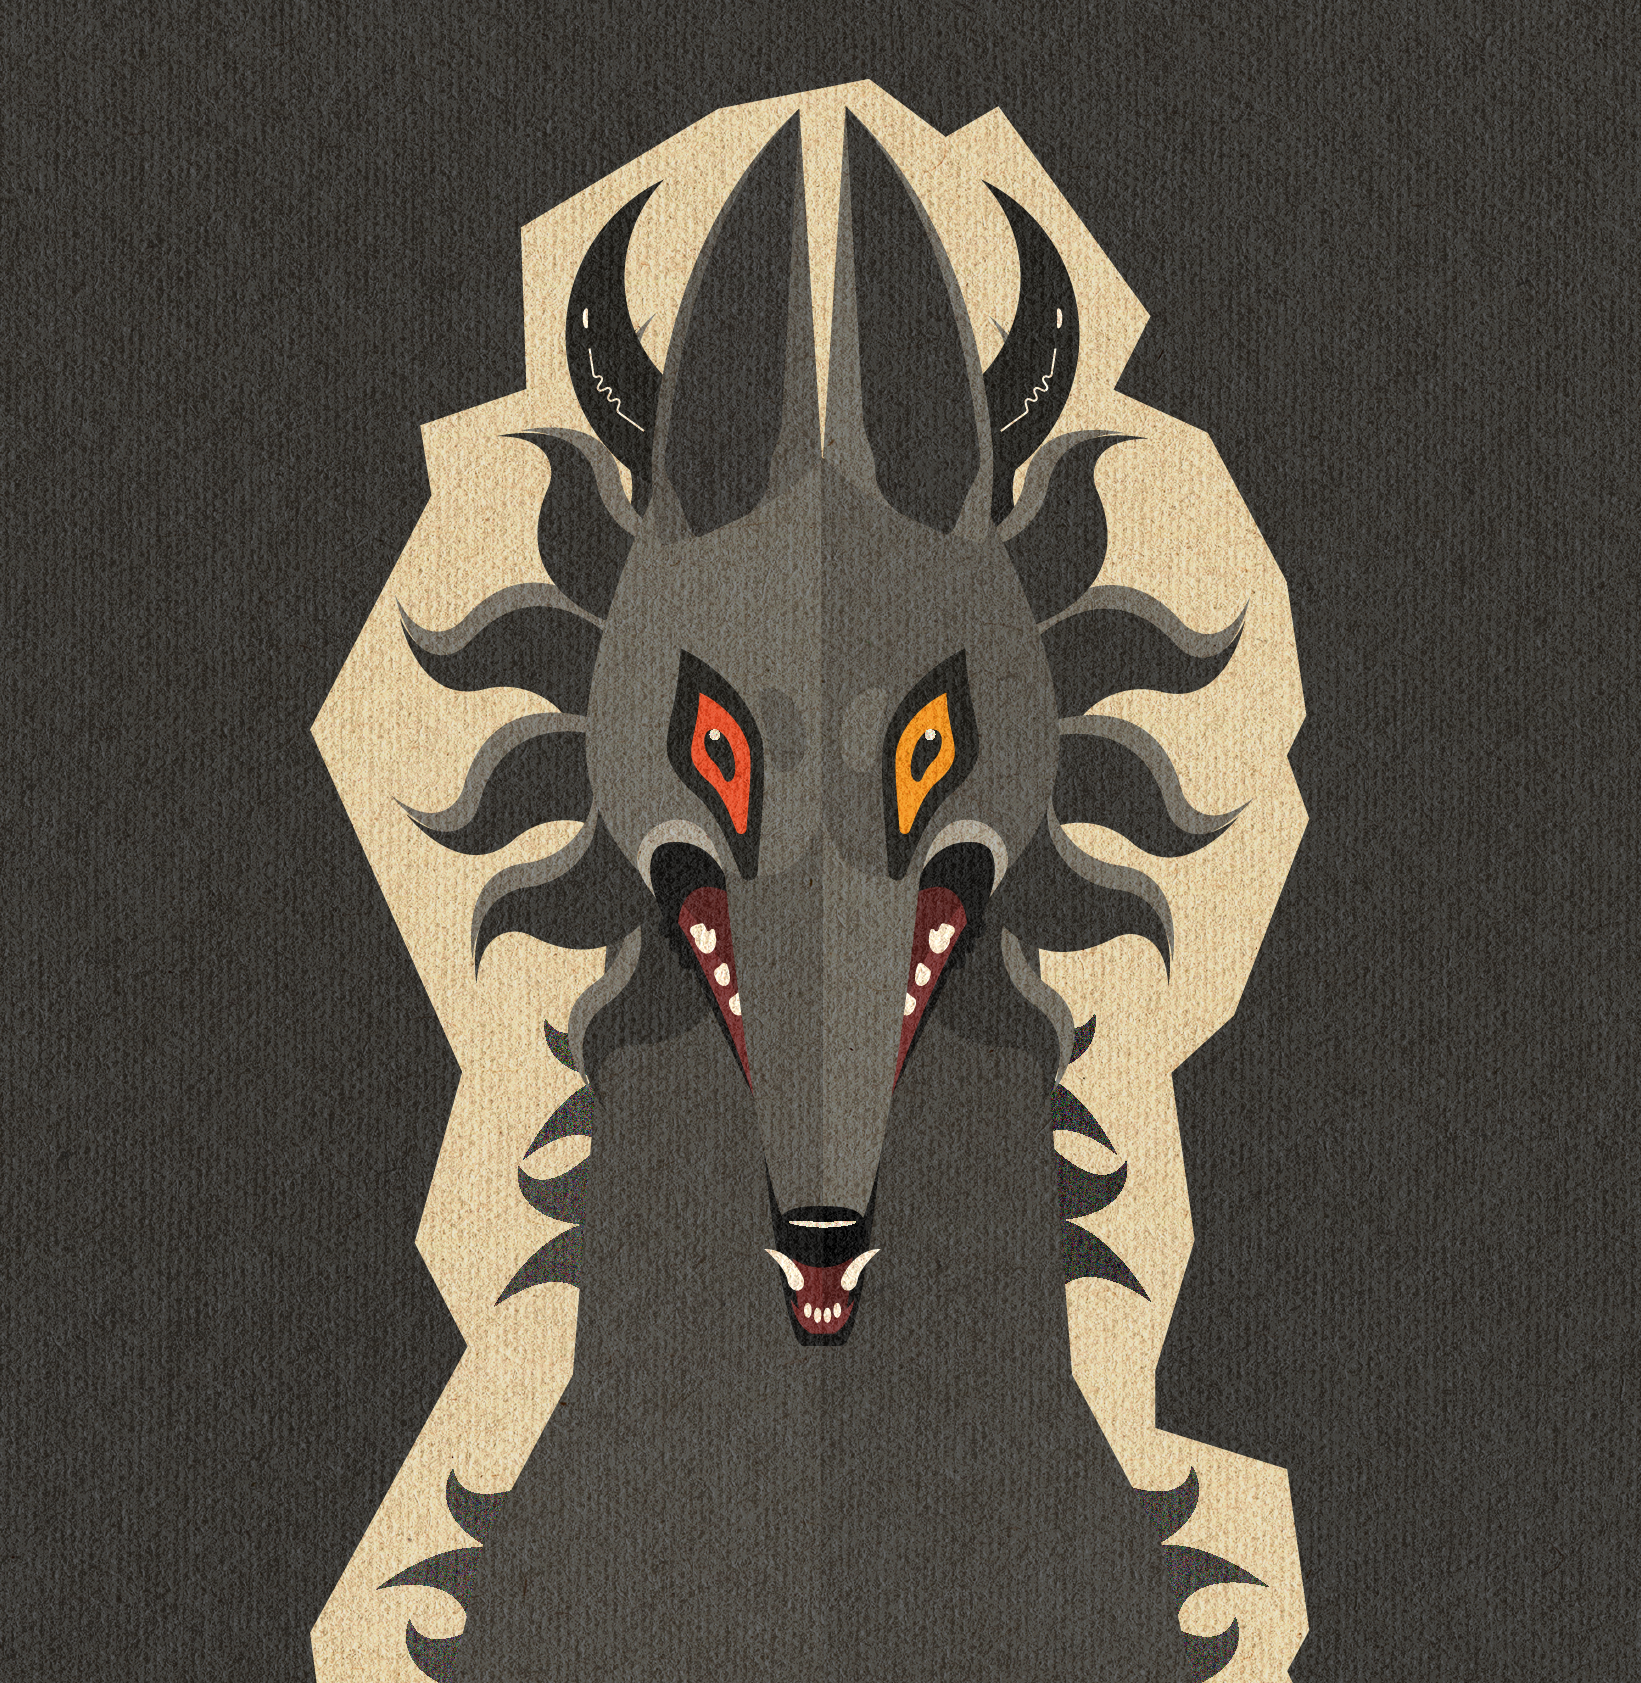 a poster of a jackal made using Illustrator